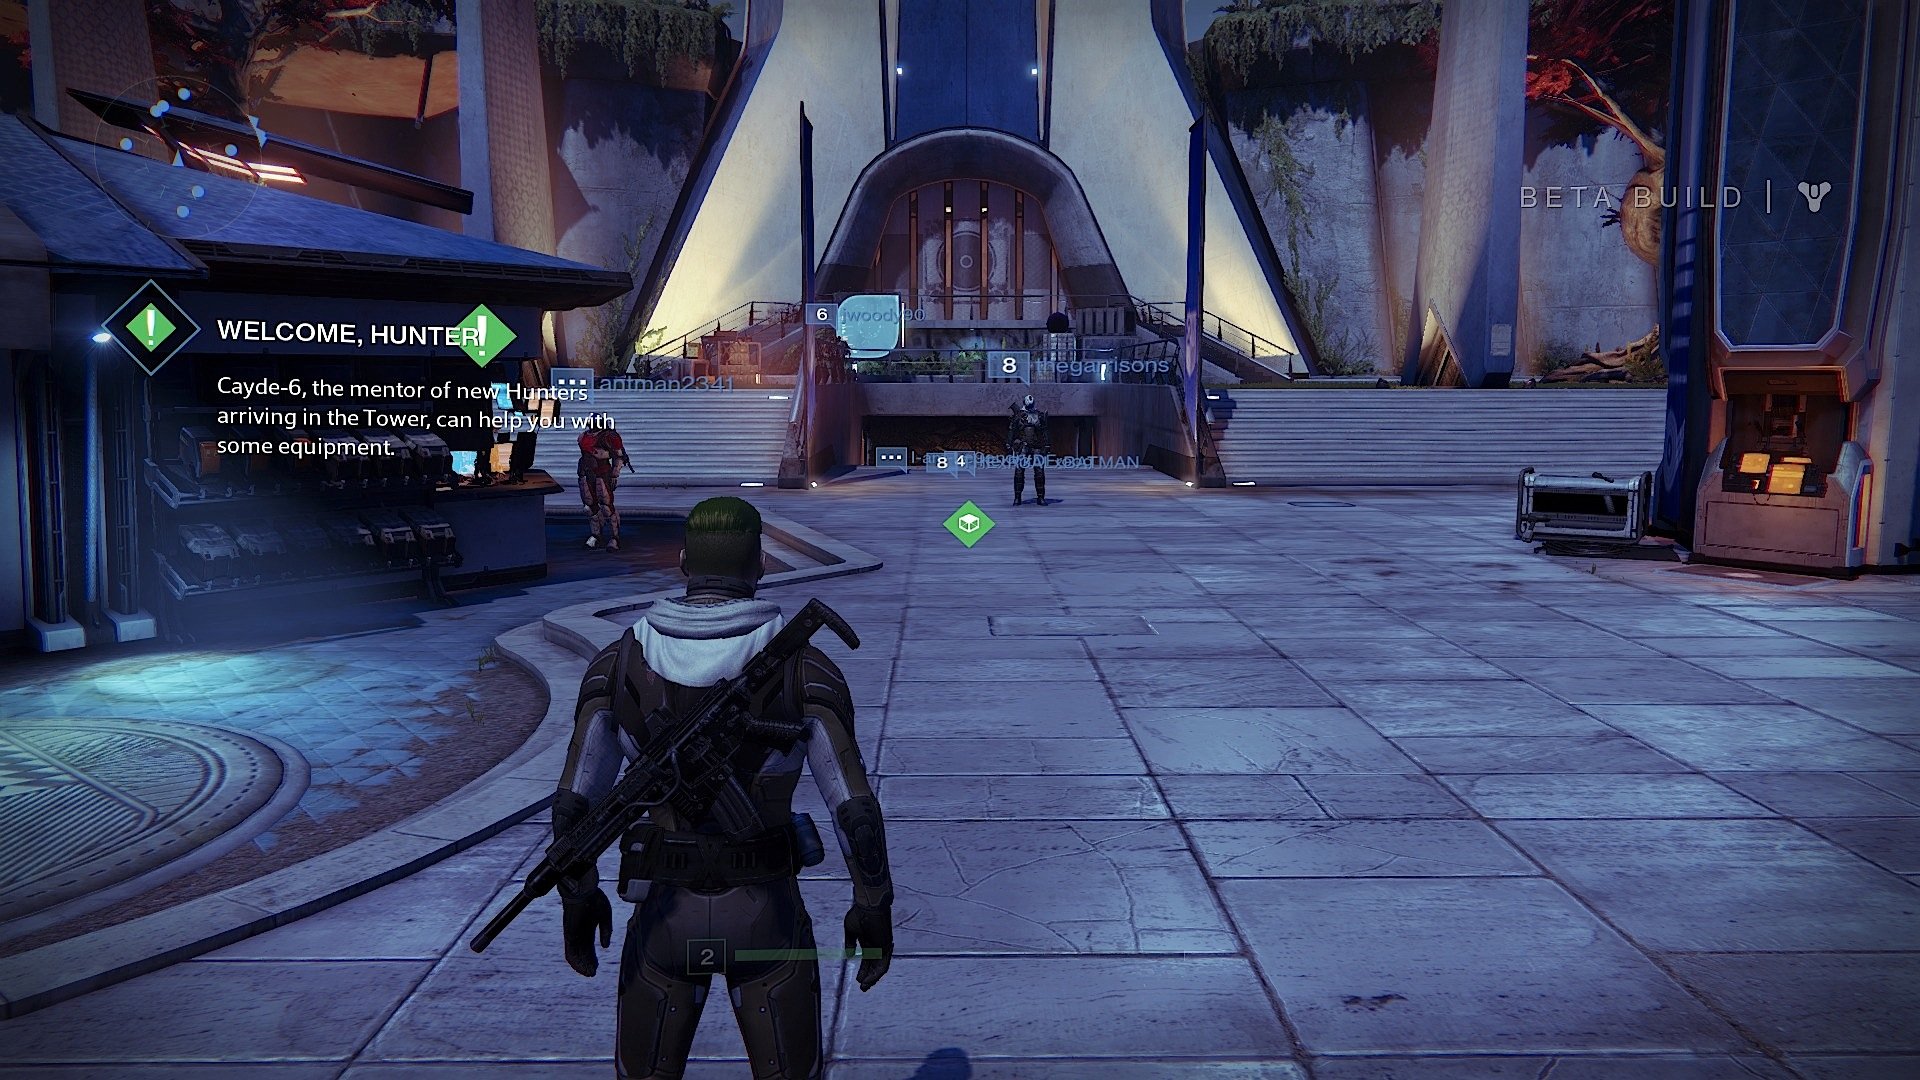 Visit the postmaster to make sure you get all of your Destiny beta loot.